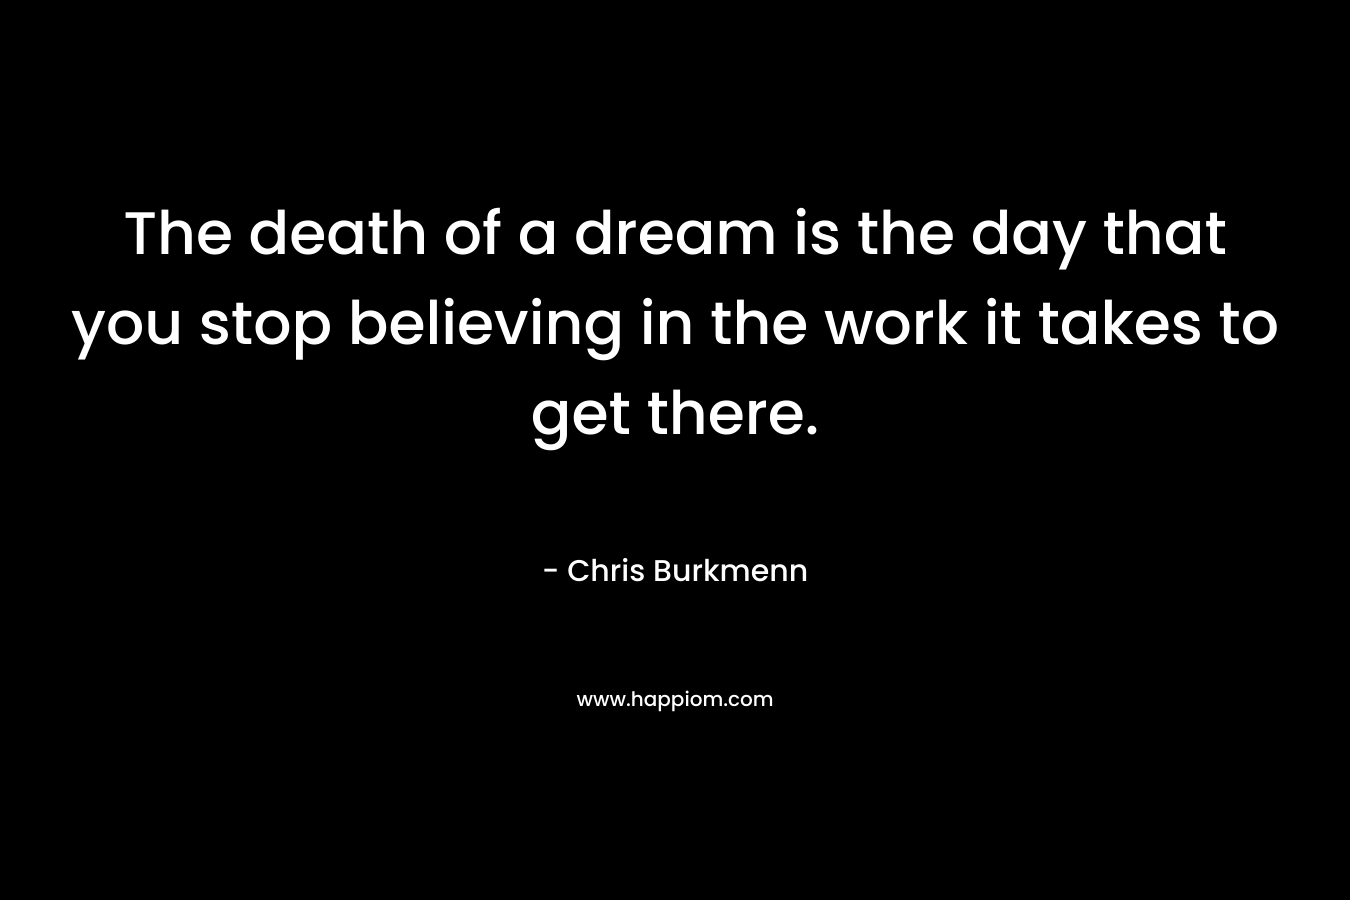 The death of a dream is the day that you stop believing in the work it takes to get there.